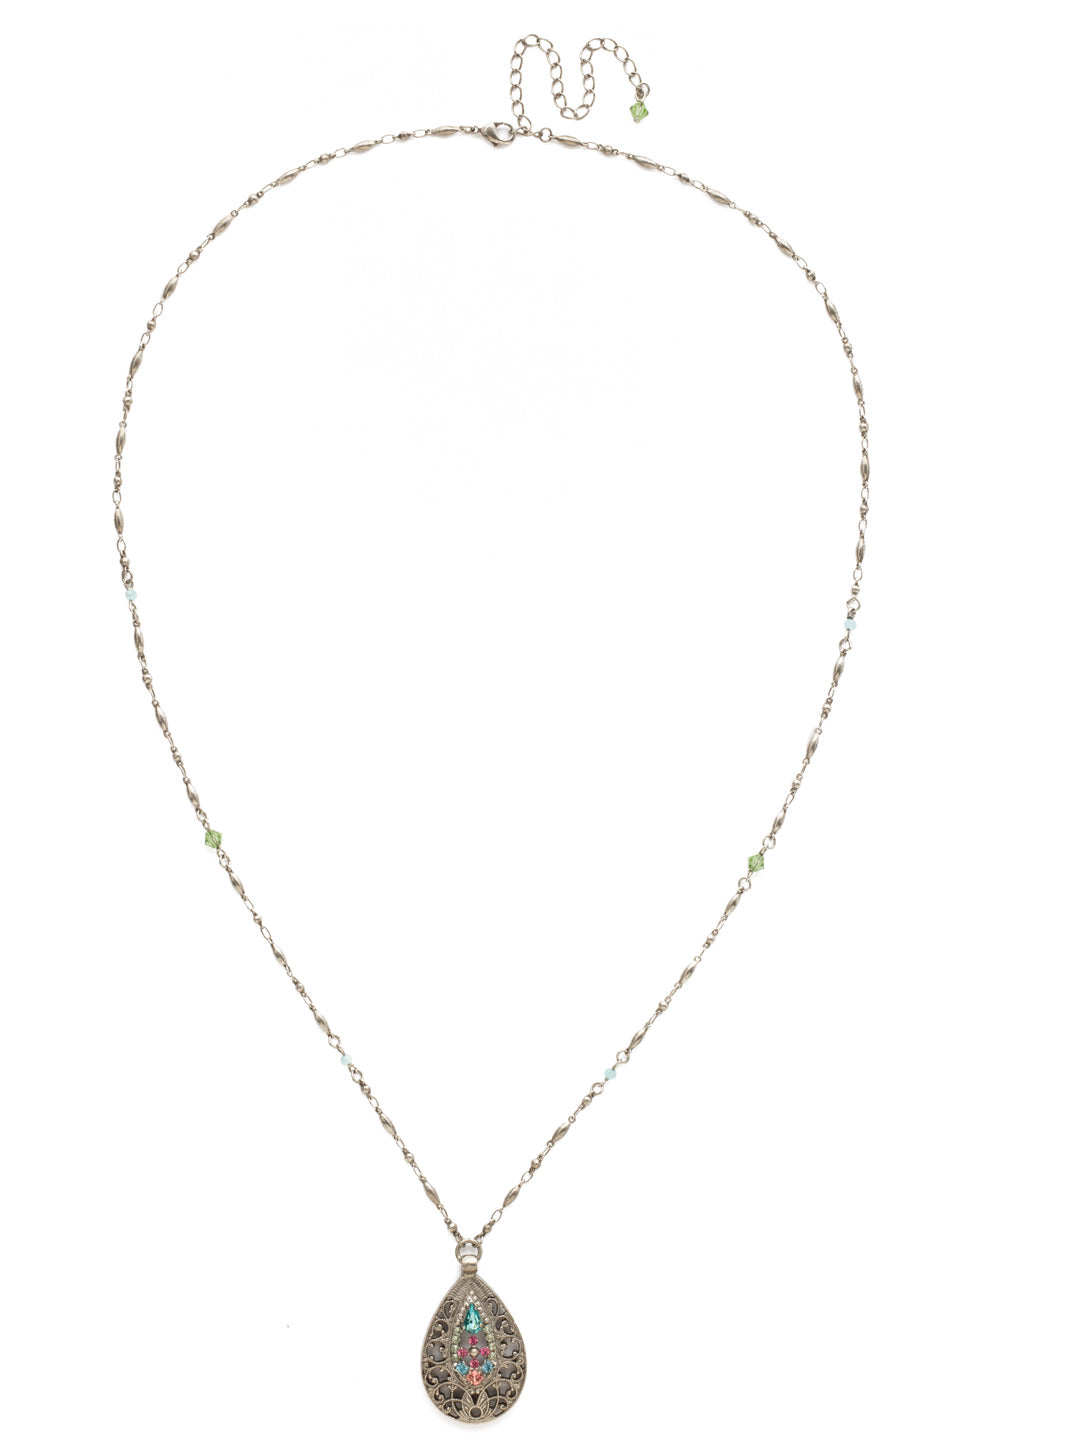 Cosmos Necklace - NDS5ASVH - <p>A pear-shaped filigree setting showcases a subtle crystal pattern composed of round and teardrop stones. From Sorrelli's Vivid Horizons collection in our Antique Silver-tone finish.</p>